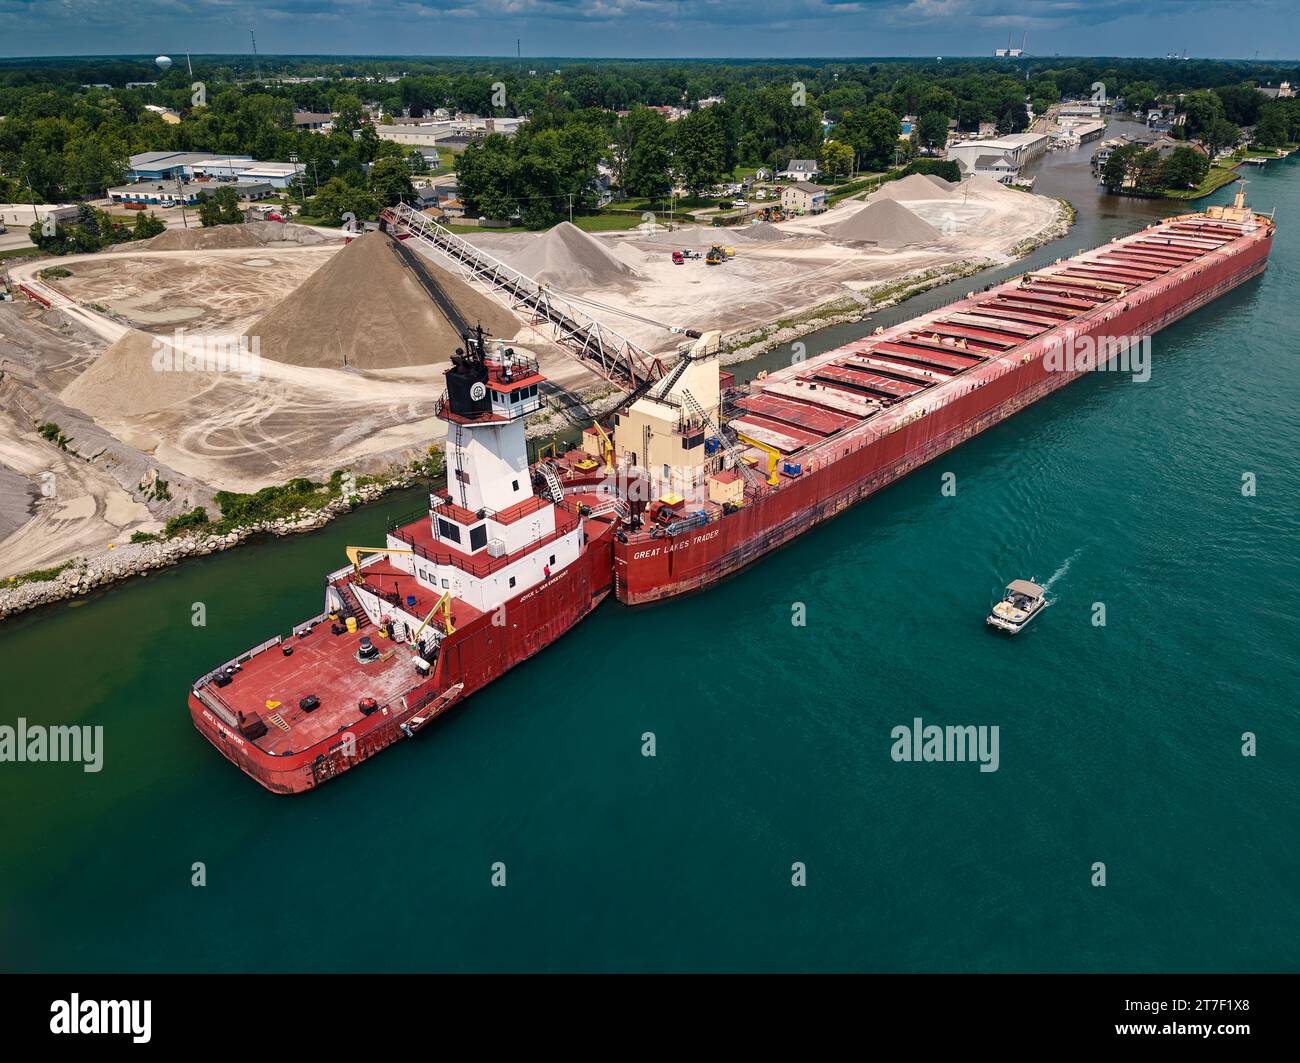 Pusher Tug Joyce L. VanEnkevort and Great Lakes Trader barge off-loading aggregate, St. Clair River, Marine City, Michigan, USA Stock Photo